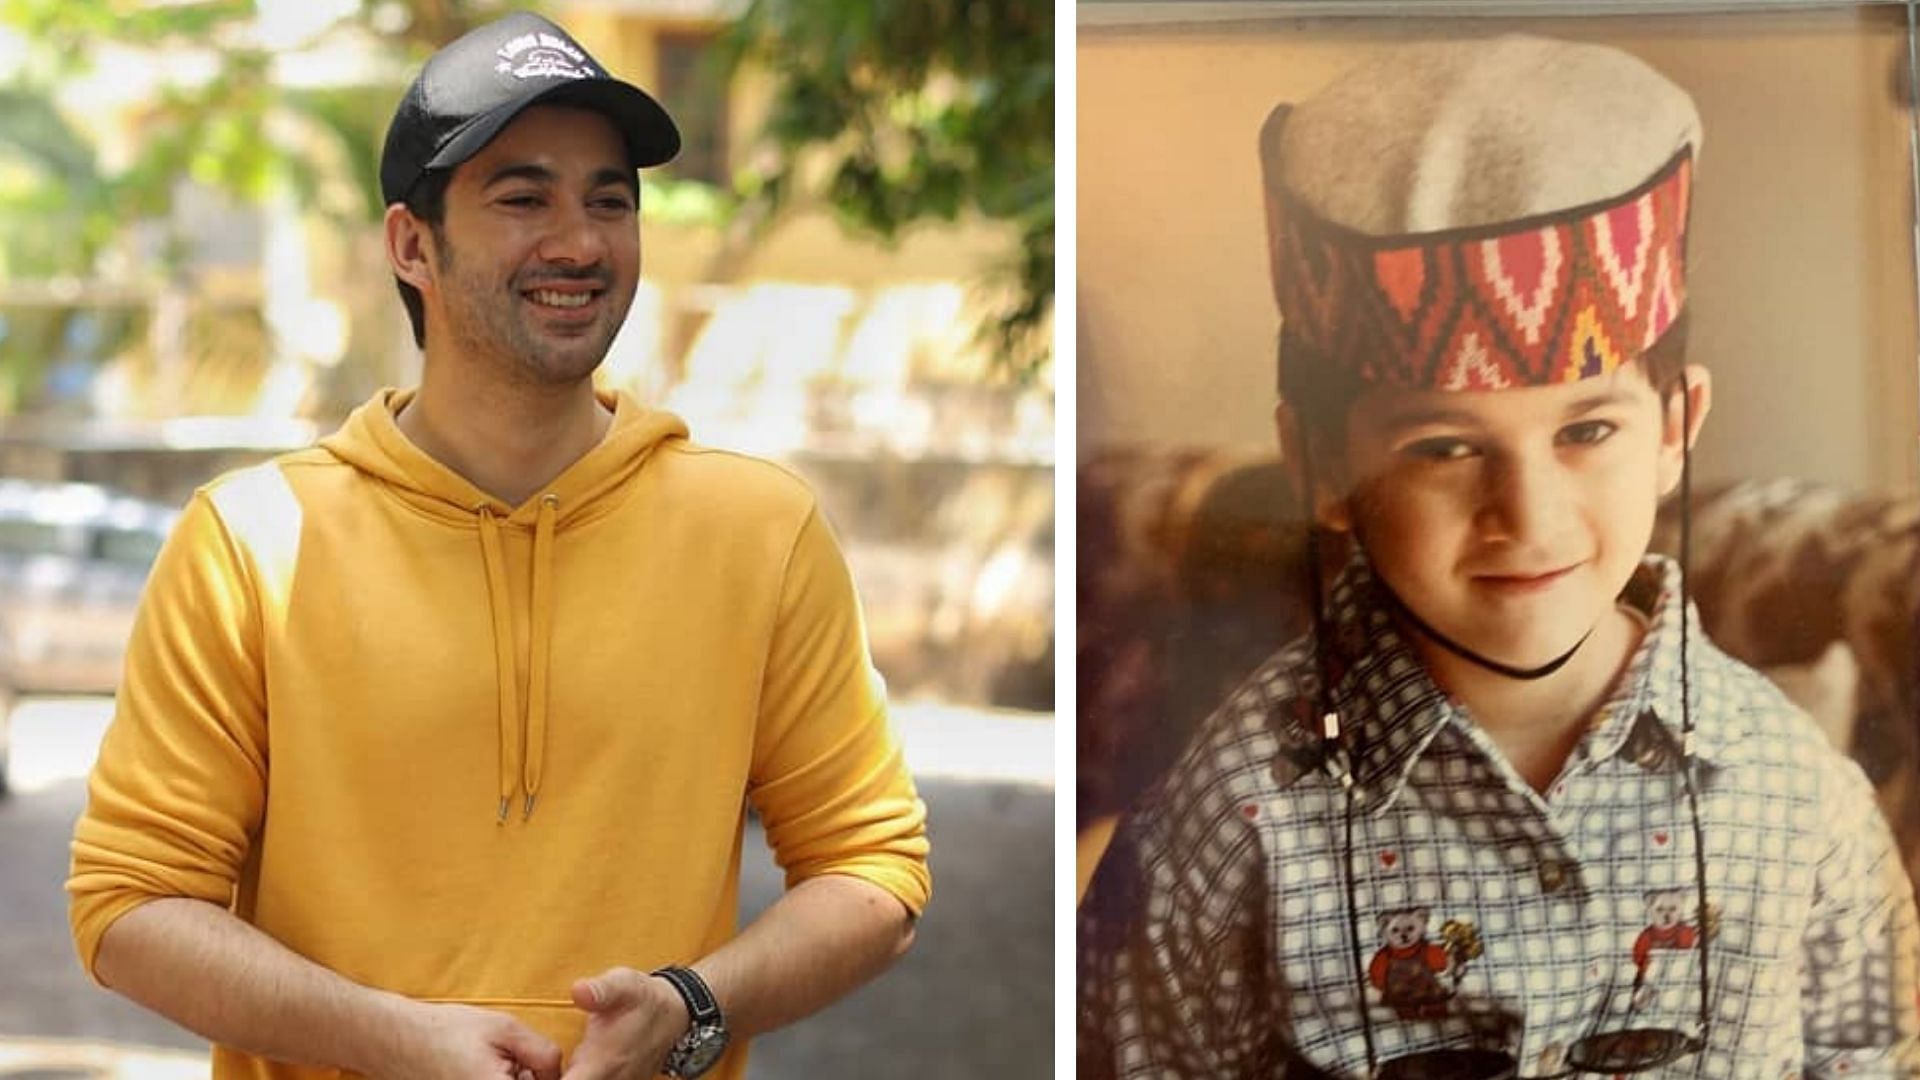 Karan Deol opens up about being bullied at school.